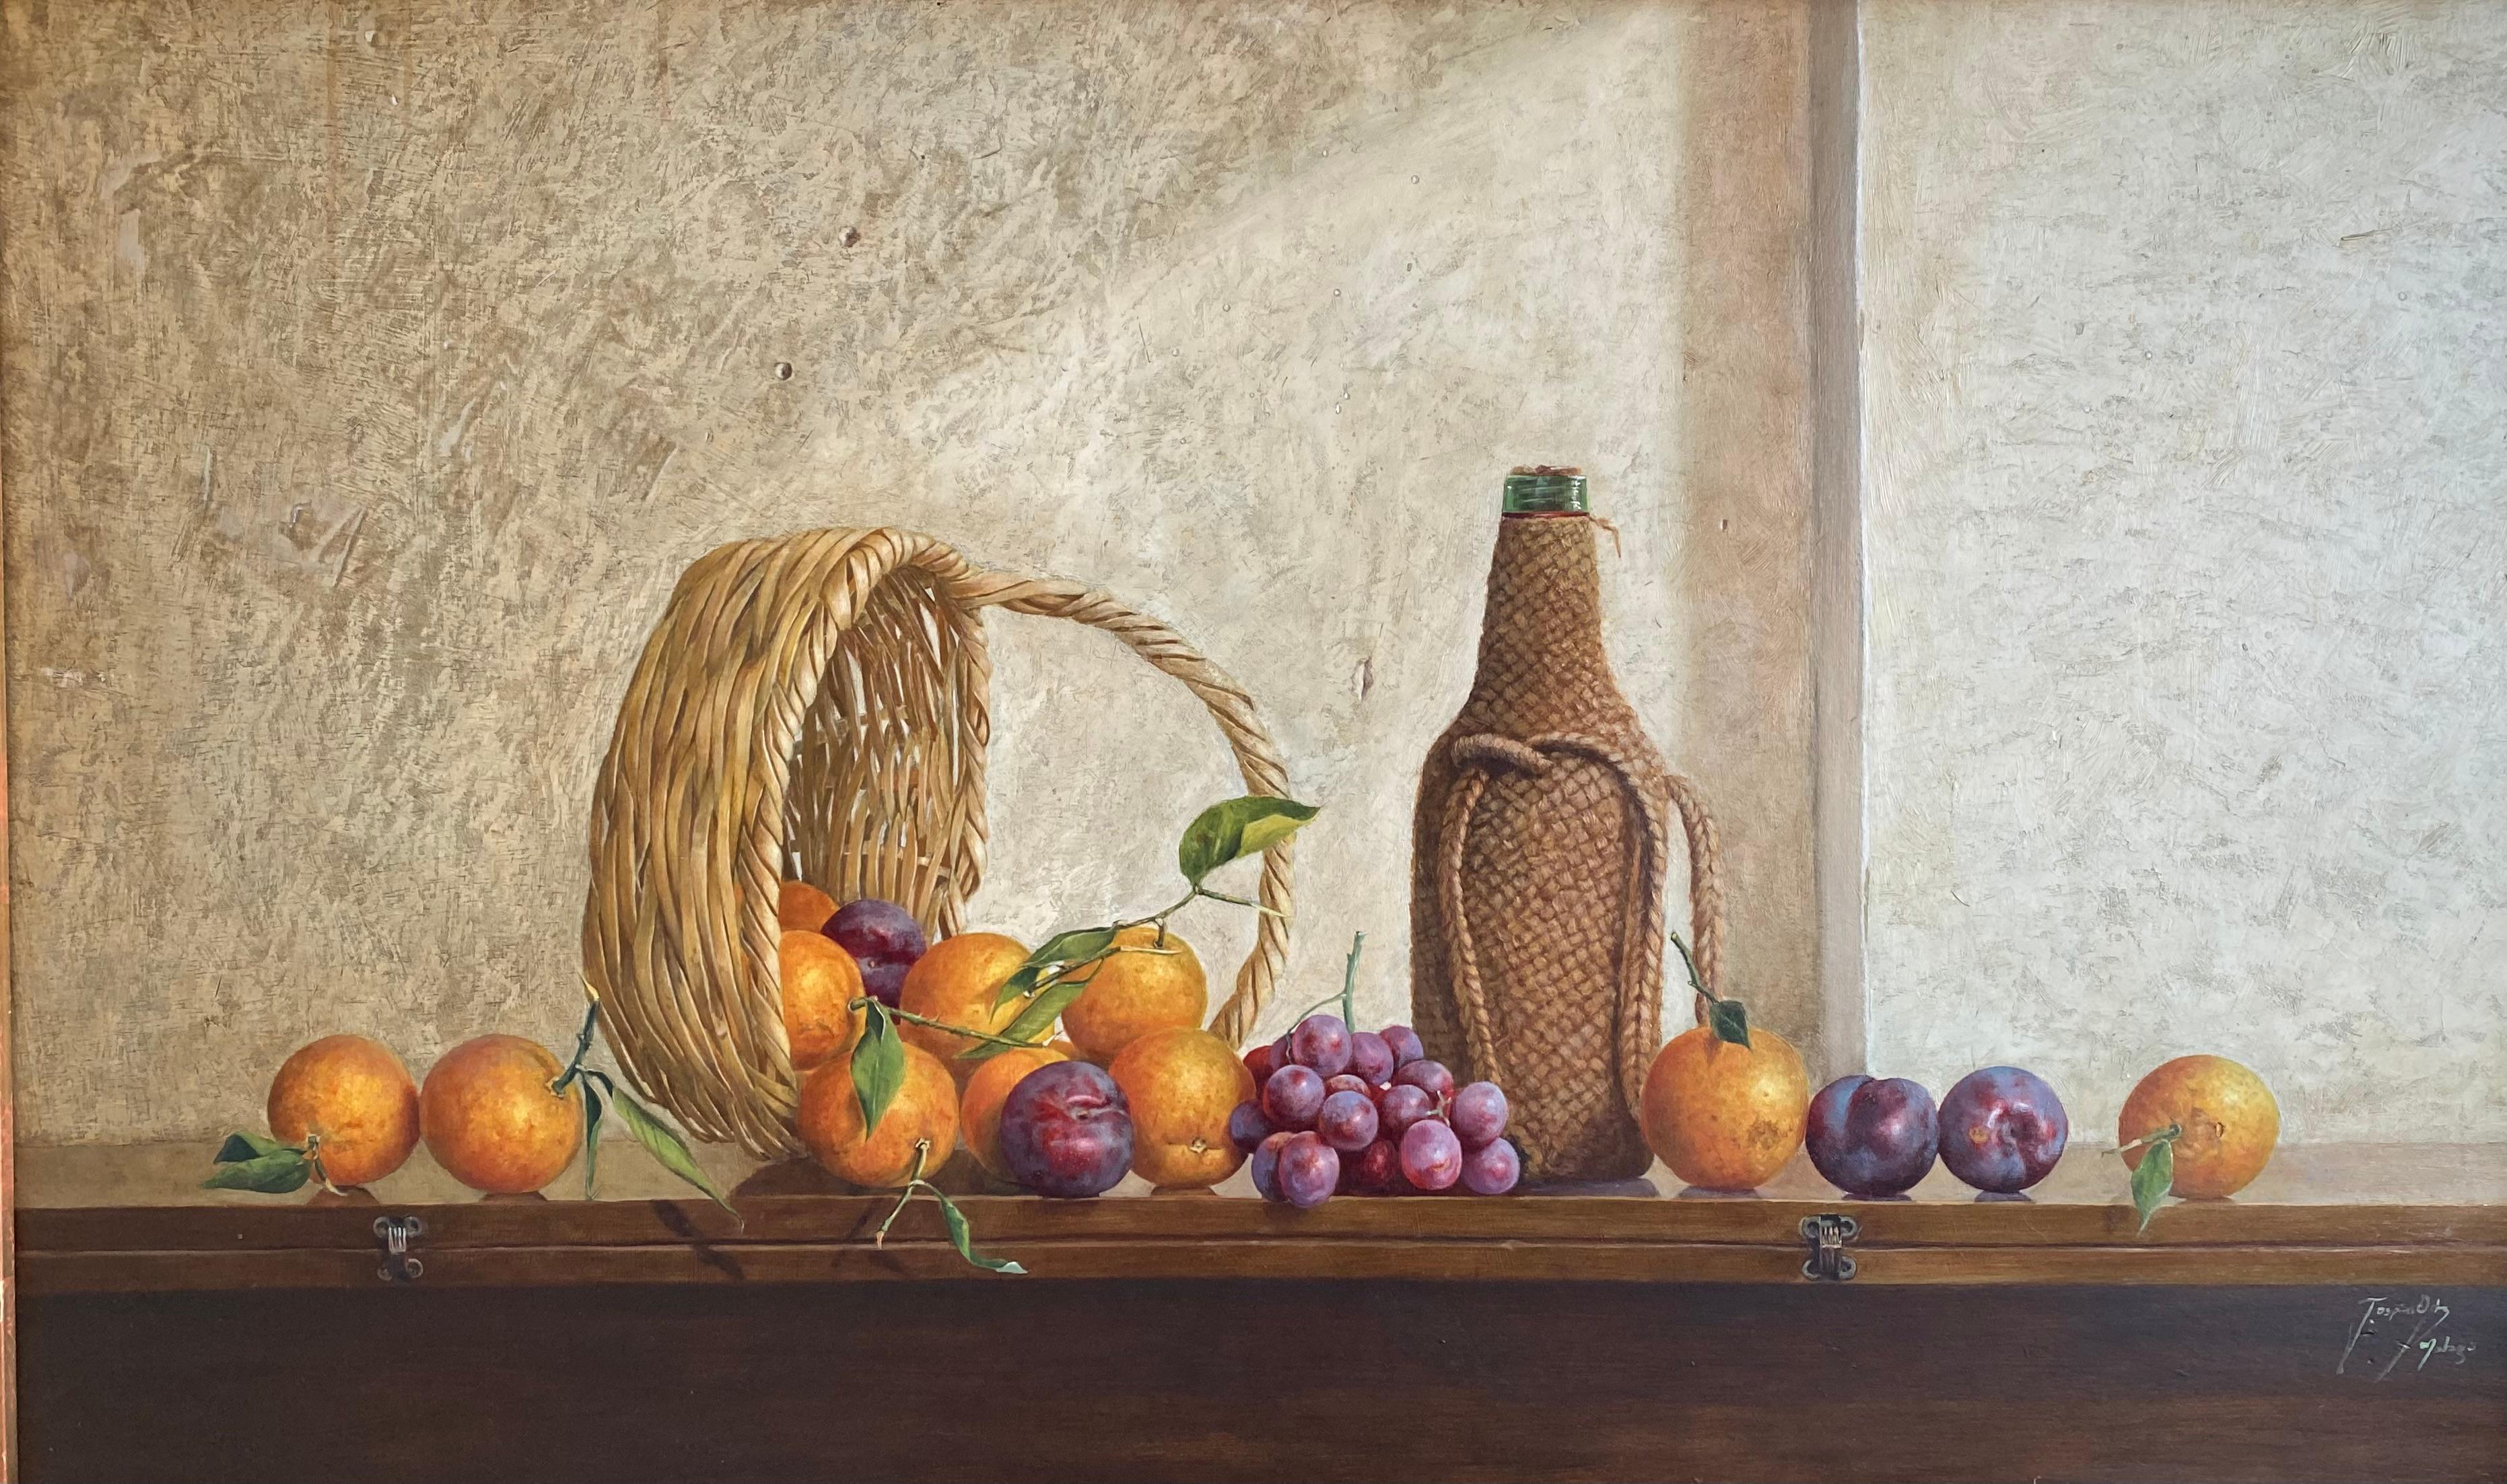 Ospina Ortiz Still-Life Painting - Still life with basket. Spanish Contemporary Figurative Realism. Oil on panel